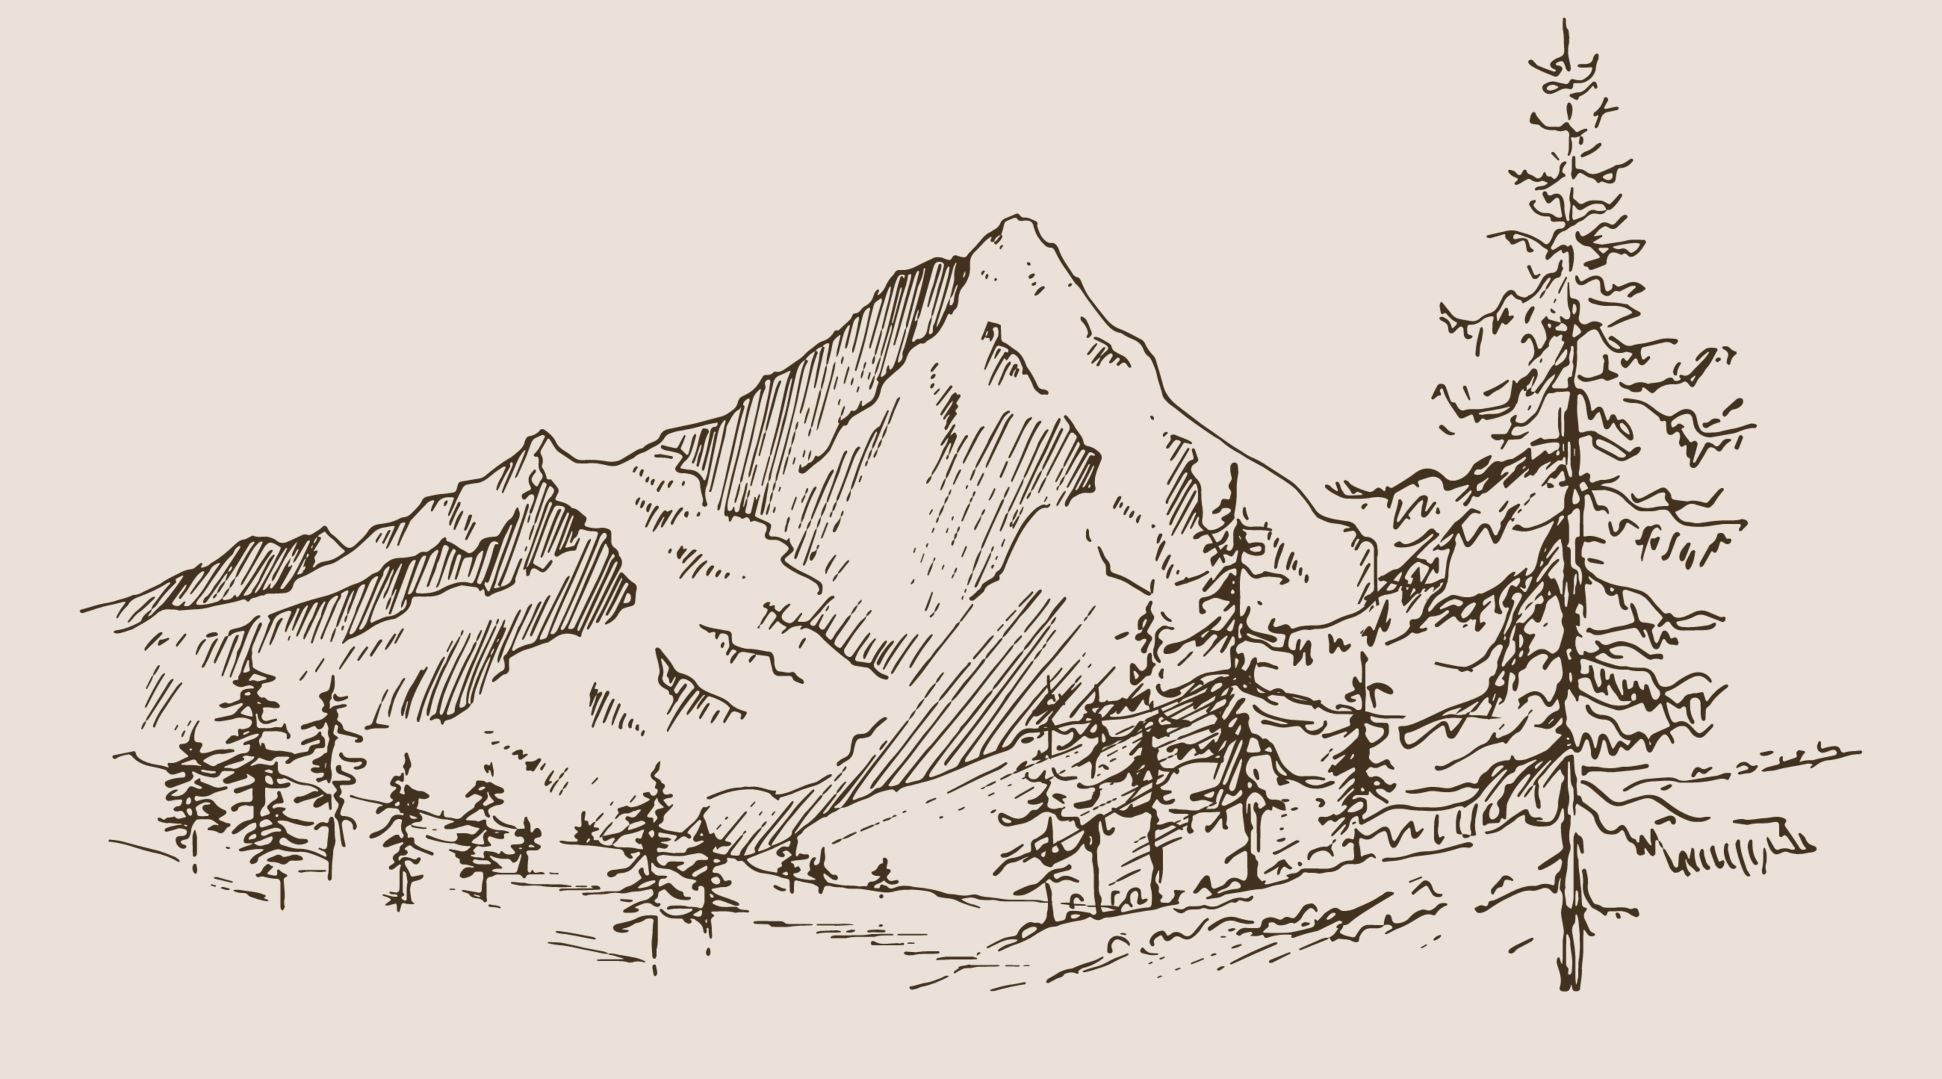 How to draw a Mountain Step by Step | Landscape Drawings - YouTube